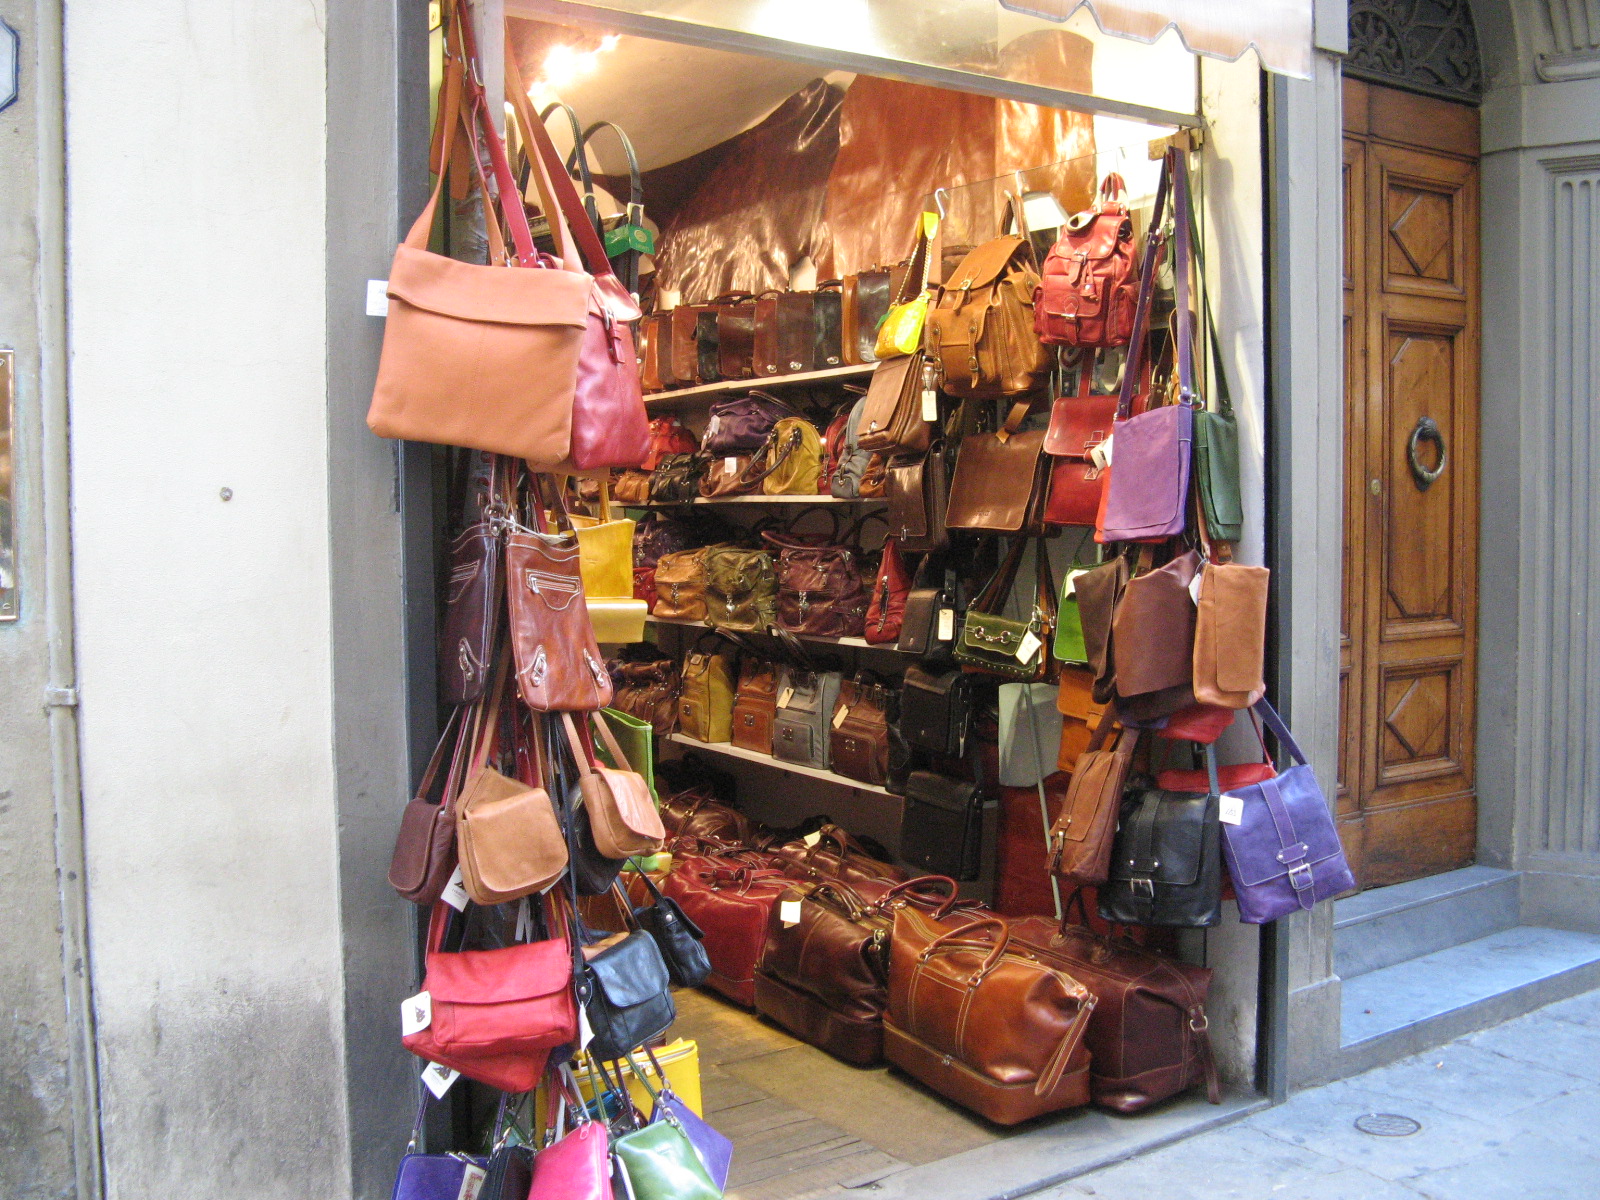 Italian Leather Bags Online  genuine leather bags and accessories handmade  in Italy